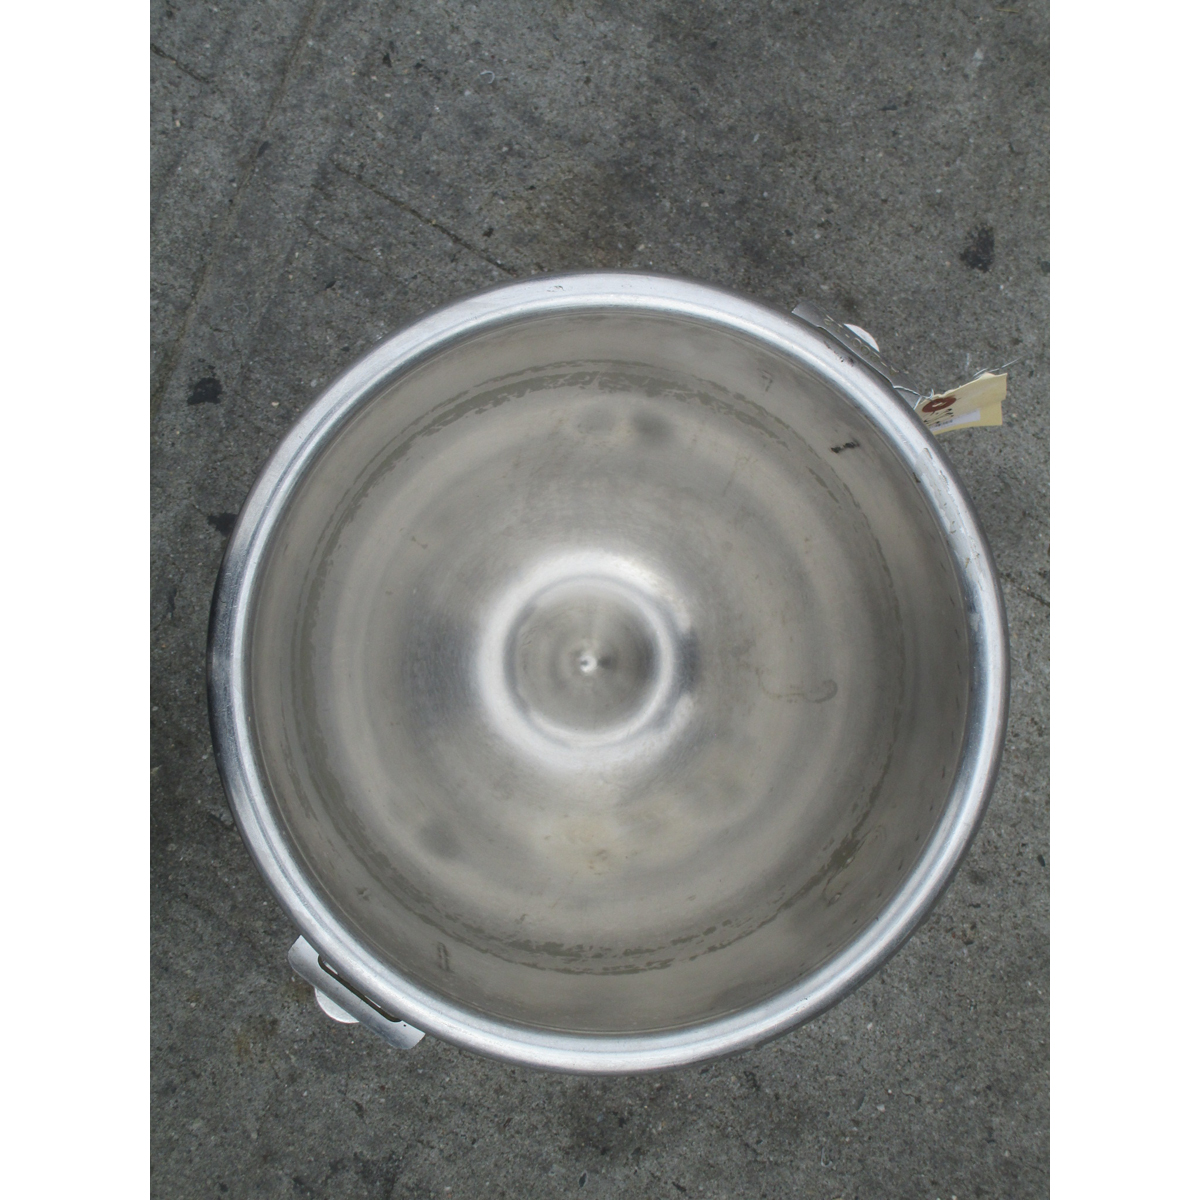 Hobart 00-295644 12 Quart Bowl To Fit A200 Mixer, Used Good Condition image 2